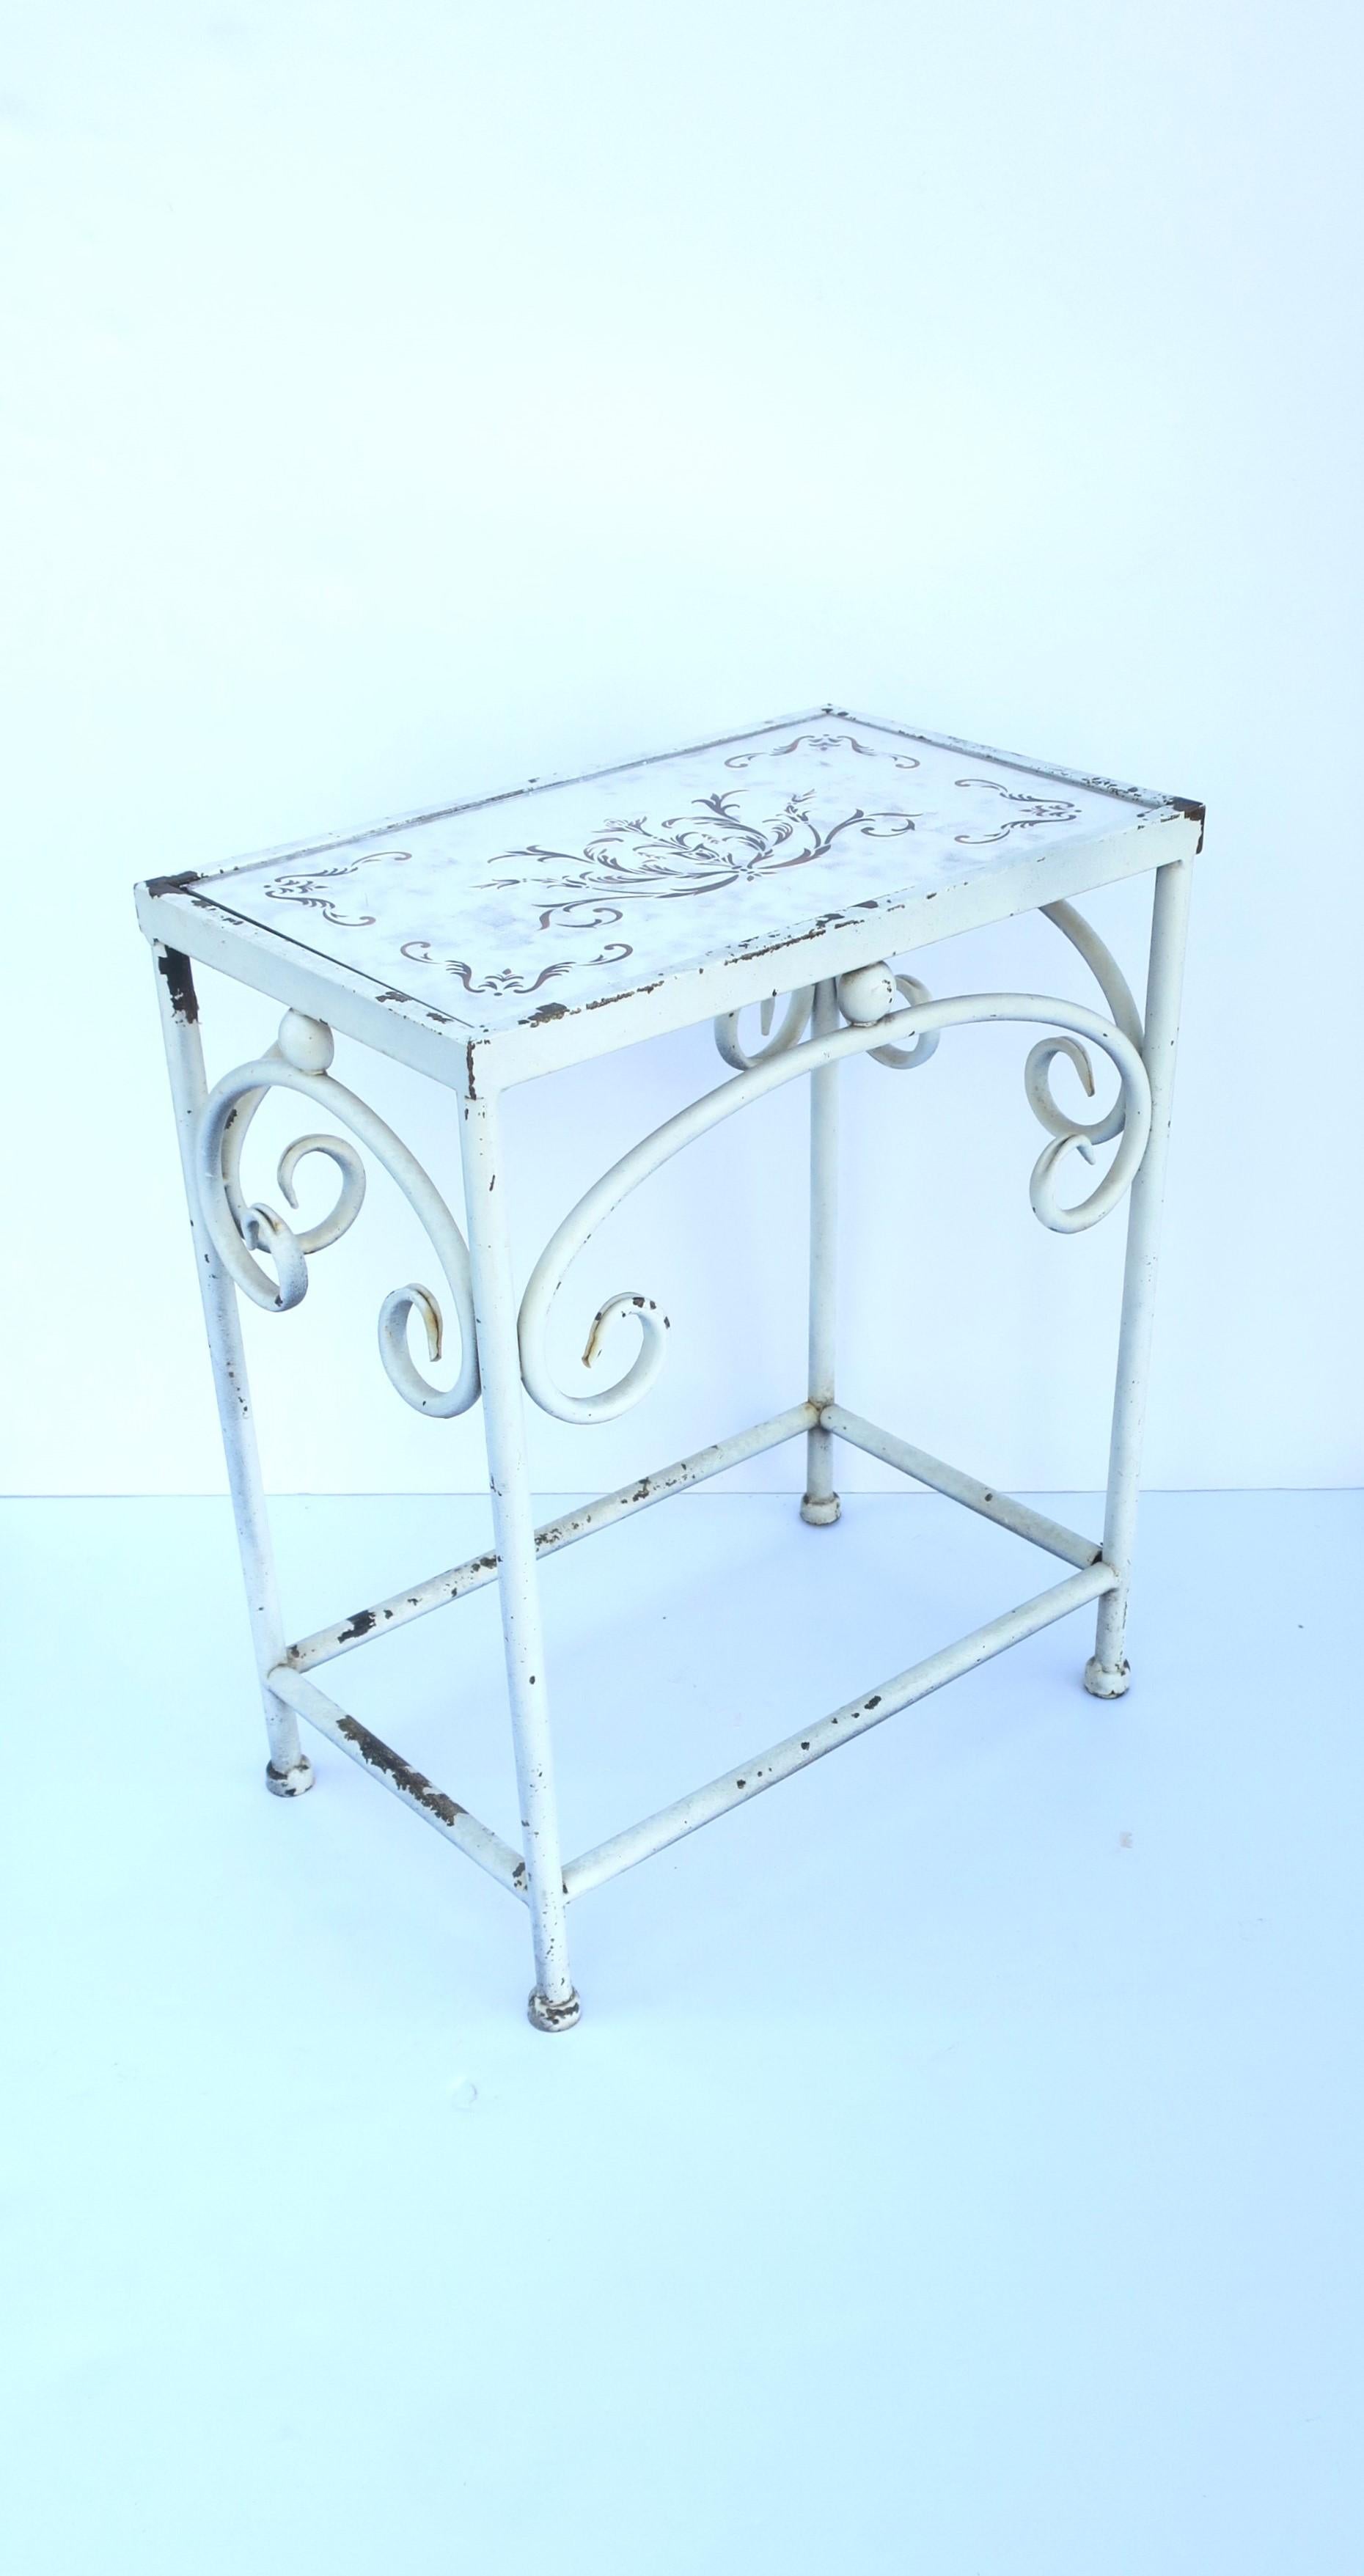 A painted white lightweight metal small side/drinks table with inset mirrored glass top with decorative design, circa mid-20th century. A convenient small table indoors or outside patio/porch. Dimensions: 8.63